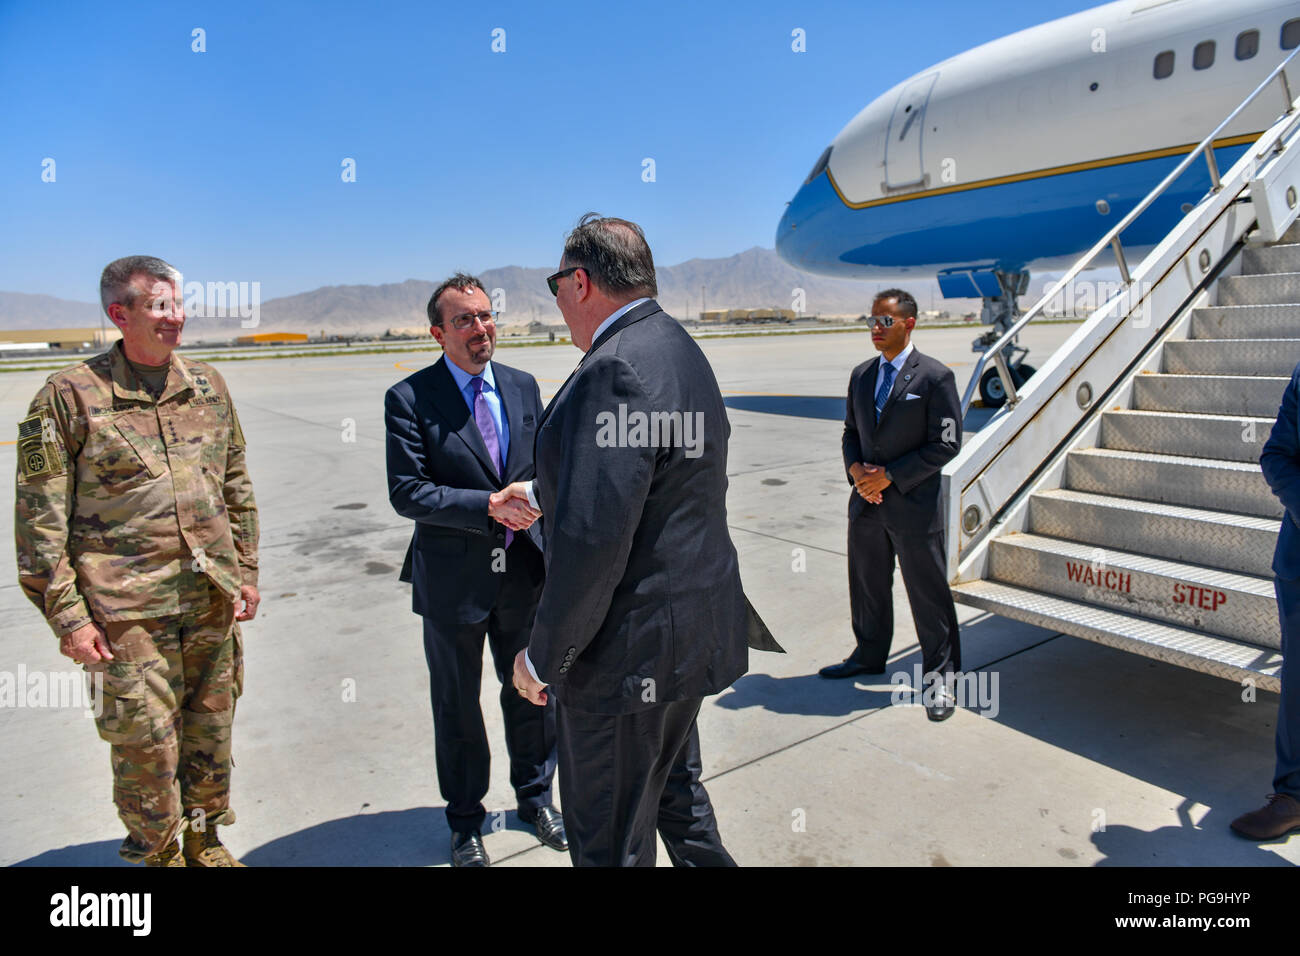 U.S. Secretary of State Michael R. Pompeo is greeted by U.S. Ambassador to Afghanistan John Bass and General John Nicholson upon arrival to Bagram Airfield on July 9, 2018. Stock Photo